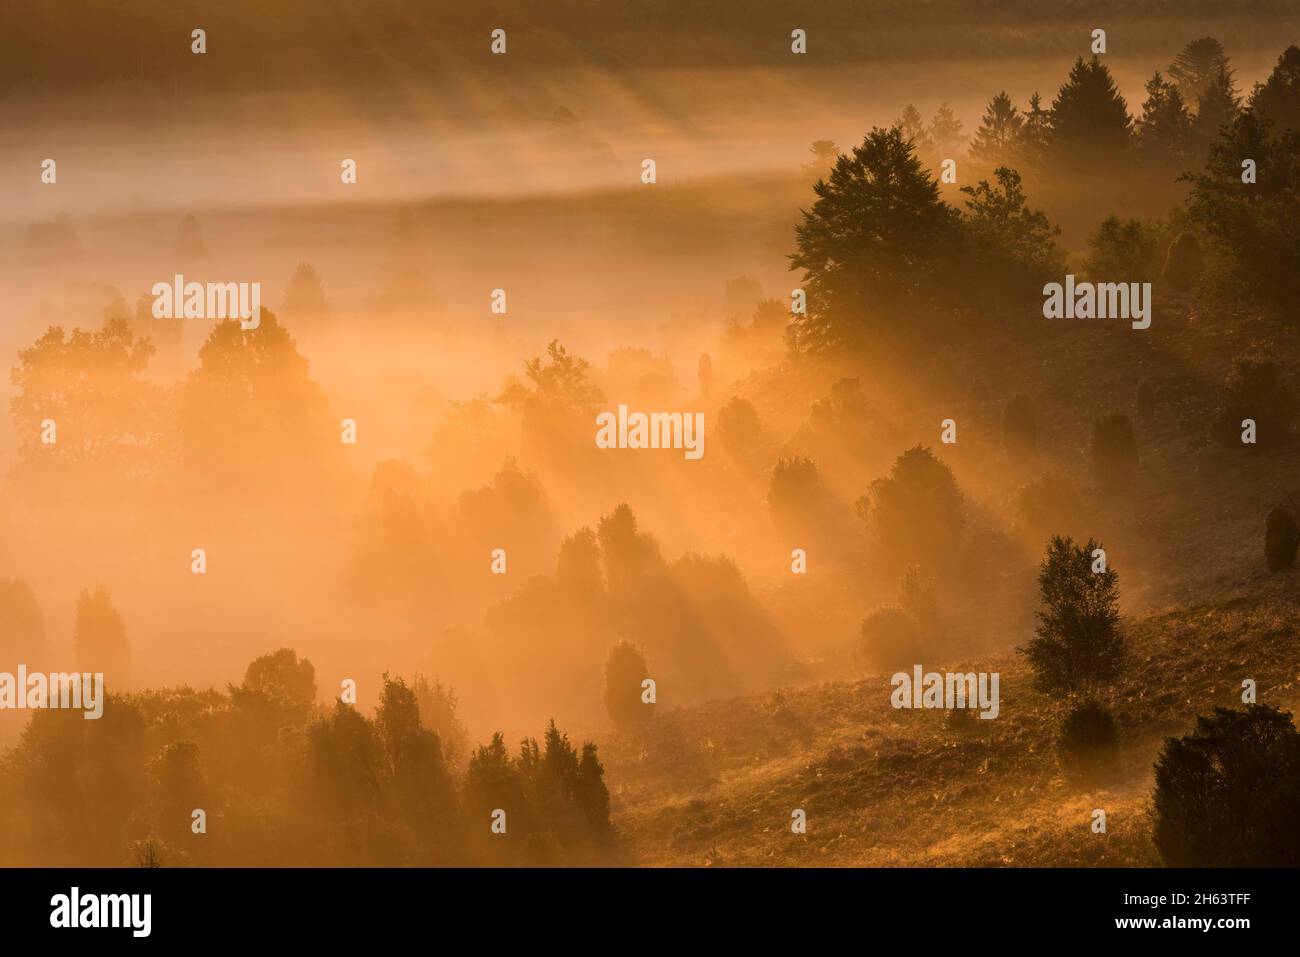 morning mood in the totengrund,the light of the rising sun makes the fog shine golden,trees and juniper bushes cast shadows,nature reserve near wilsede near bispingen,lüneburg heath nature park,germany,lower saxony Stock Photo